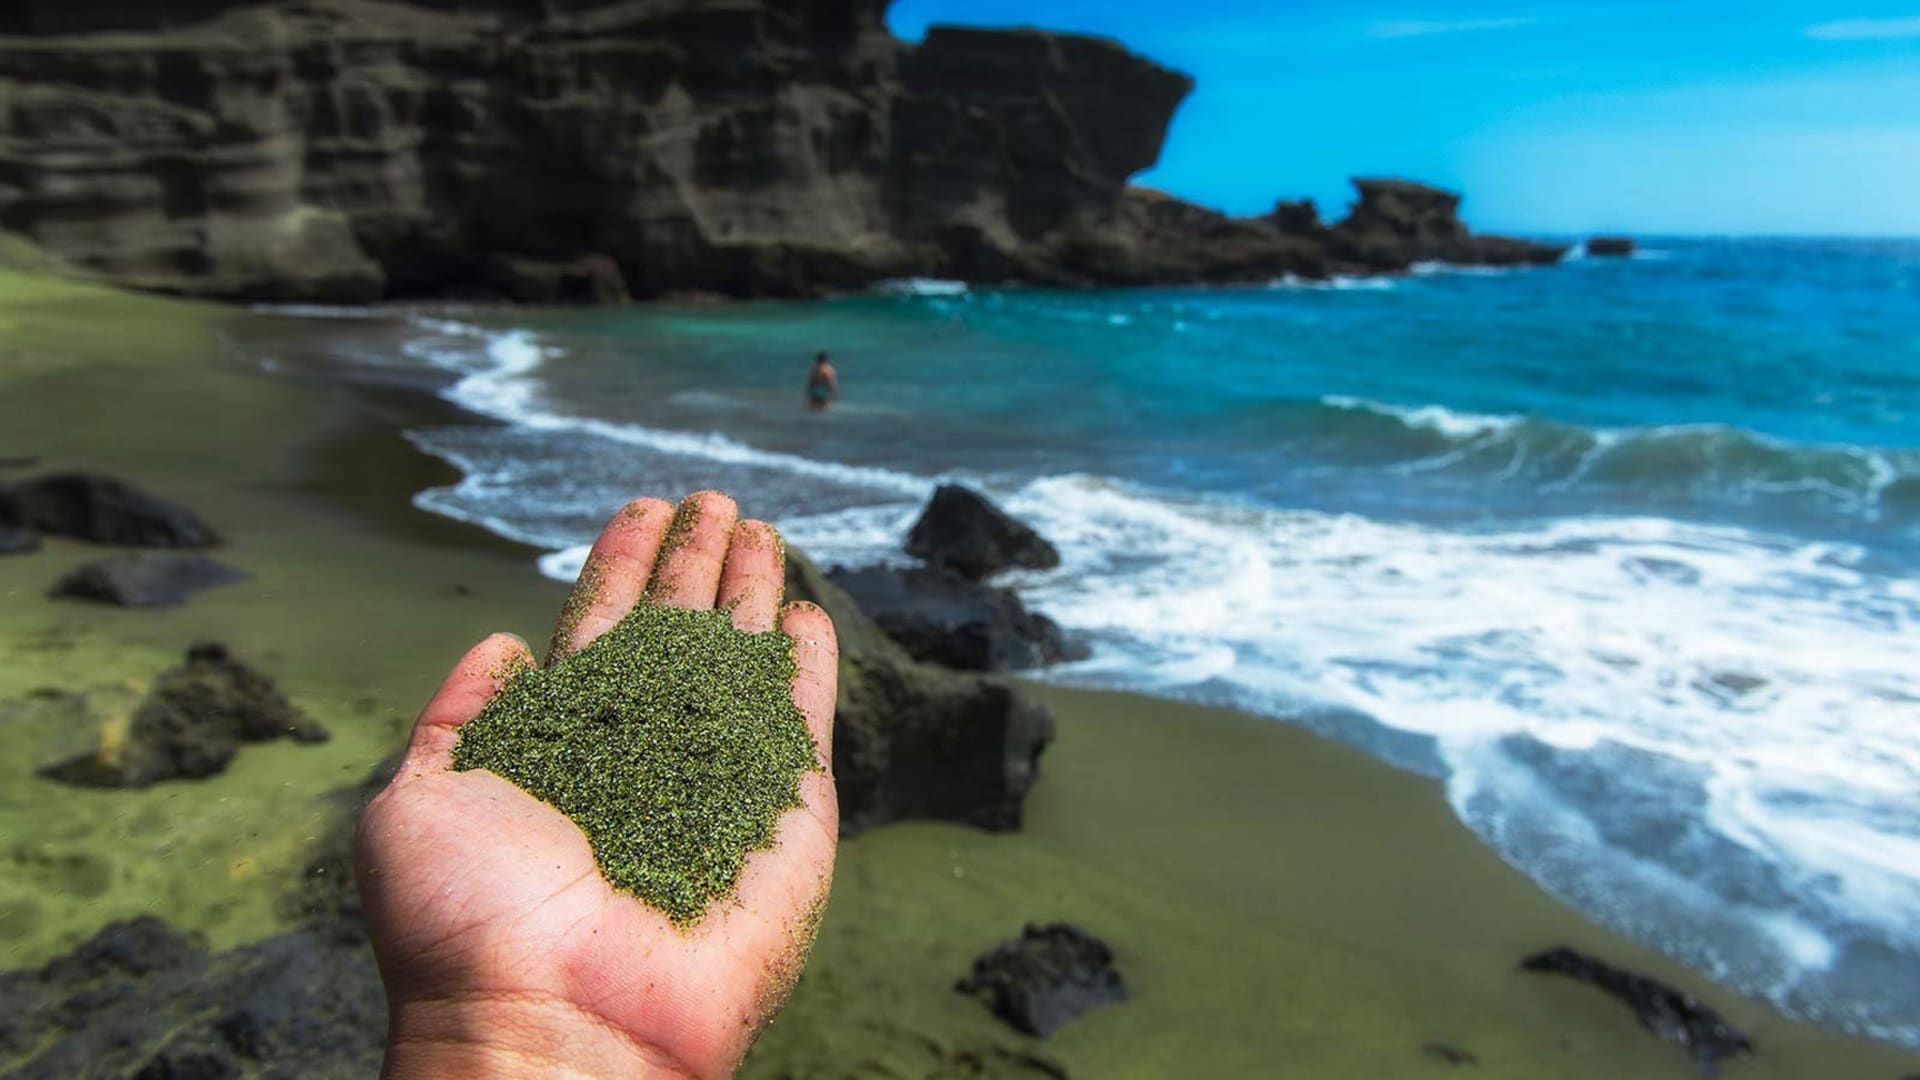 Ever been to a green sand beach? The newest geohack to fight climate change